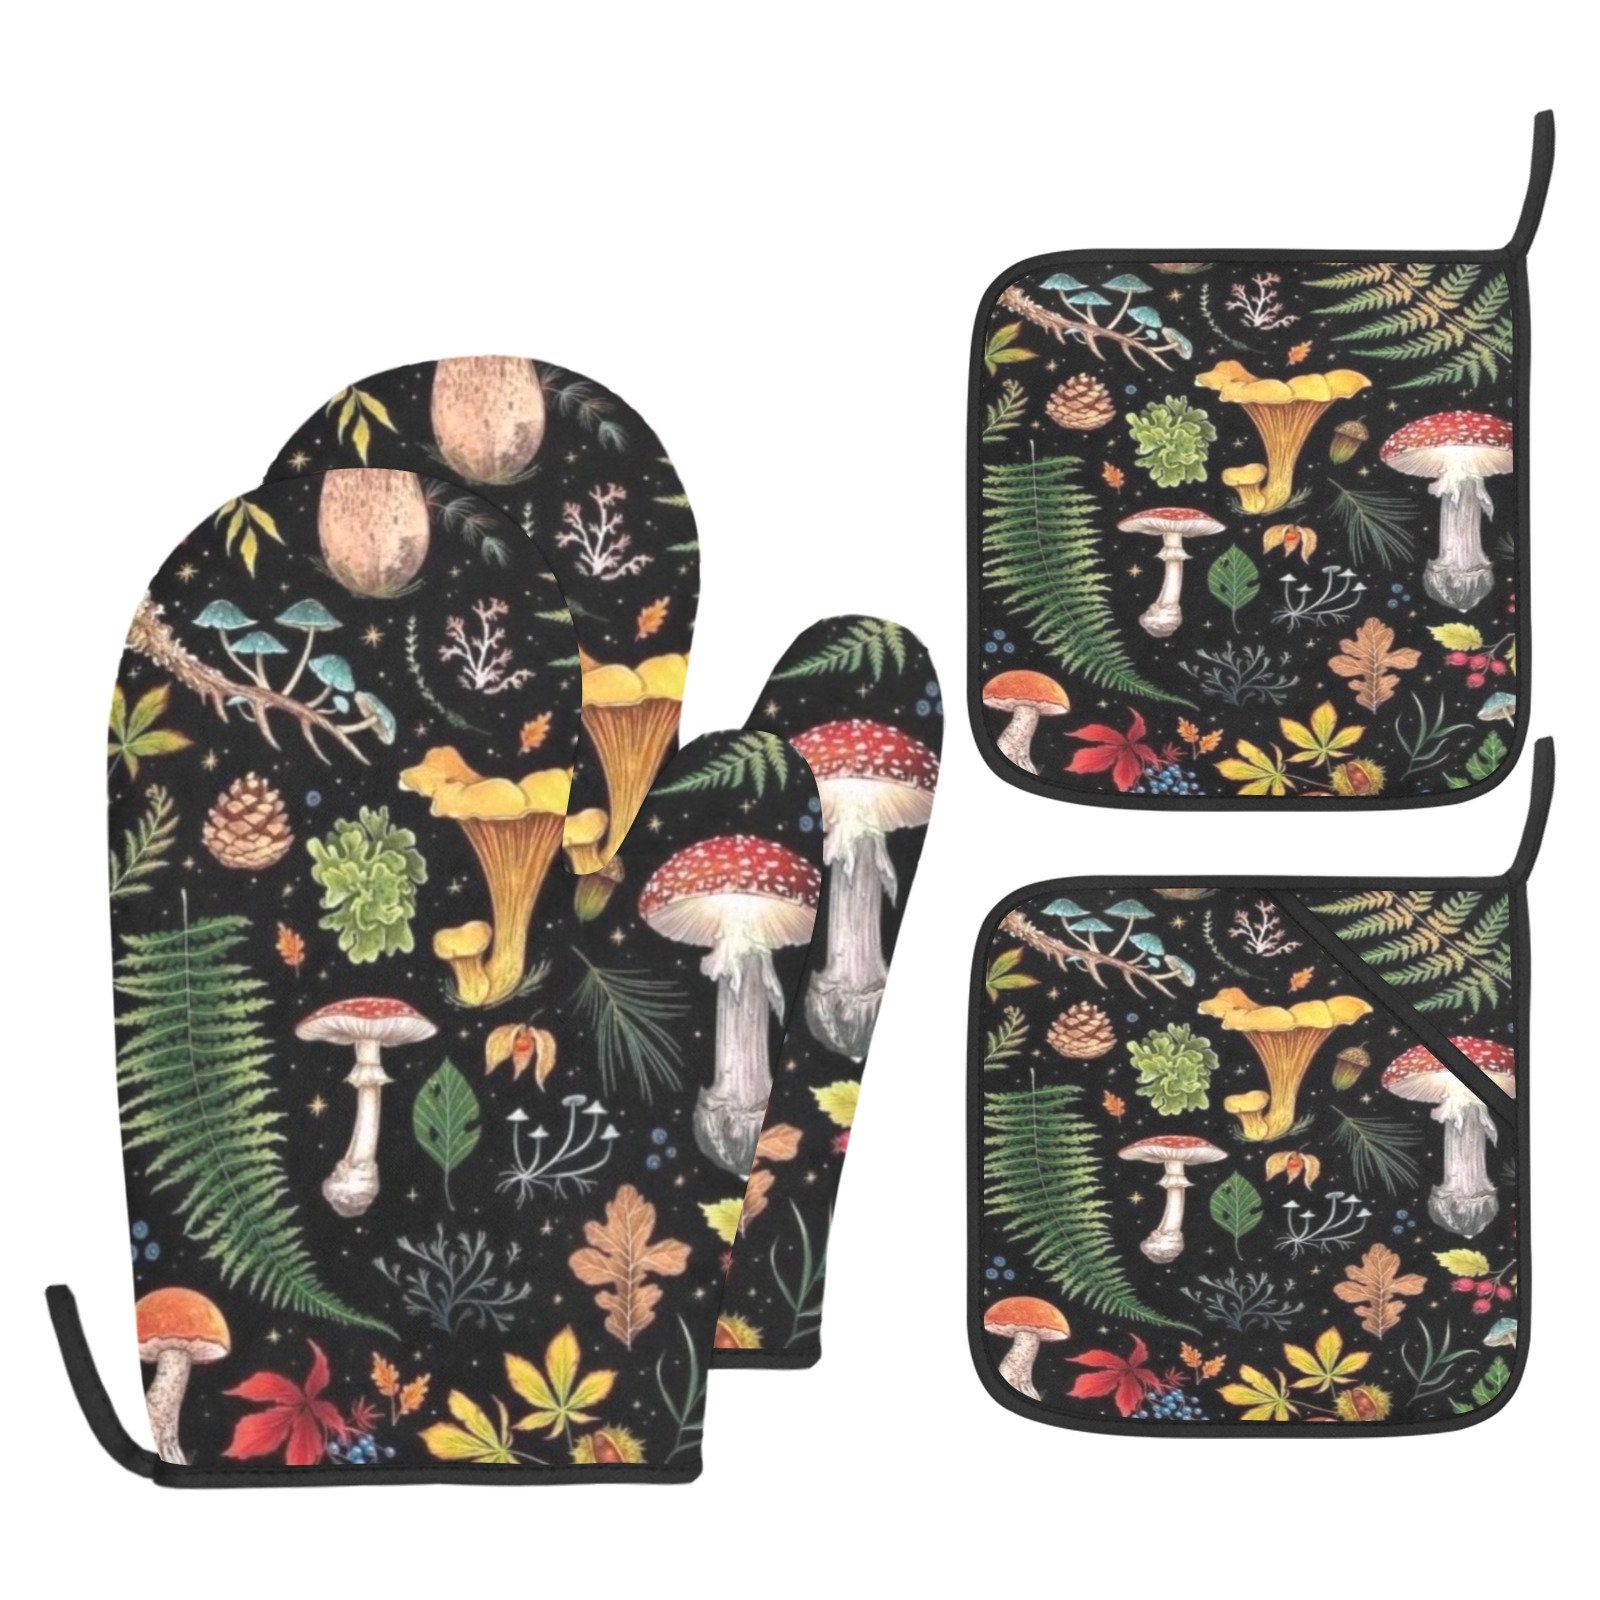 Cute Mushroom Oven Mitts and Pot Holders Sets of 3,Funny Black Gothic  Witchy Gifts Heat Resistant Kitchen Mitts Non Slip Washable for Cooking  Grilling